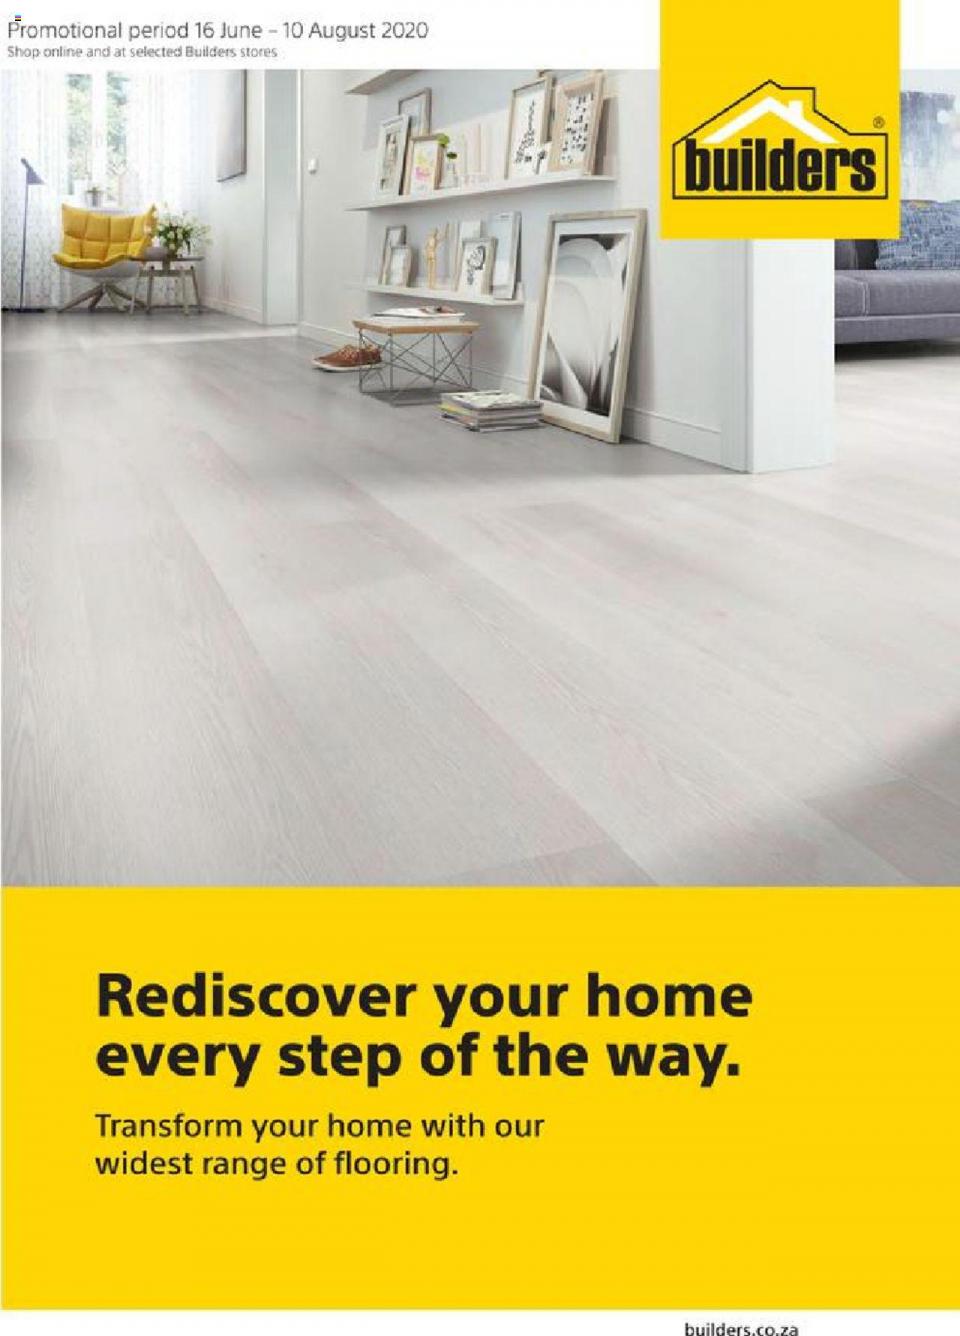 Builders Warehouse Specials Rediscover Your Home 16 June 2020